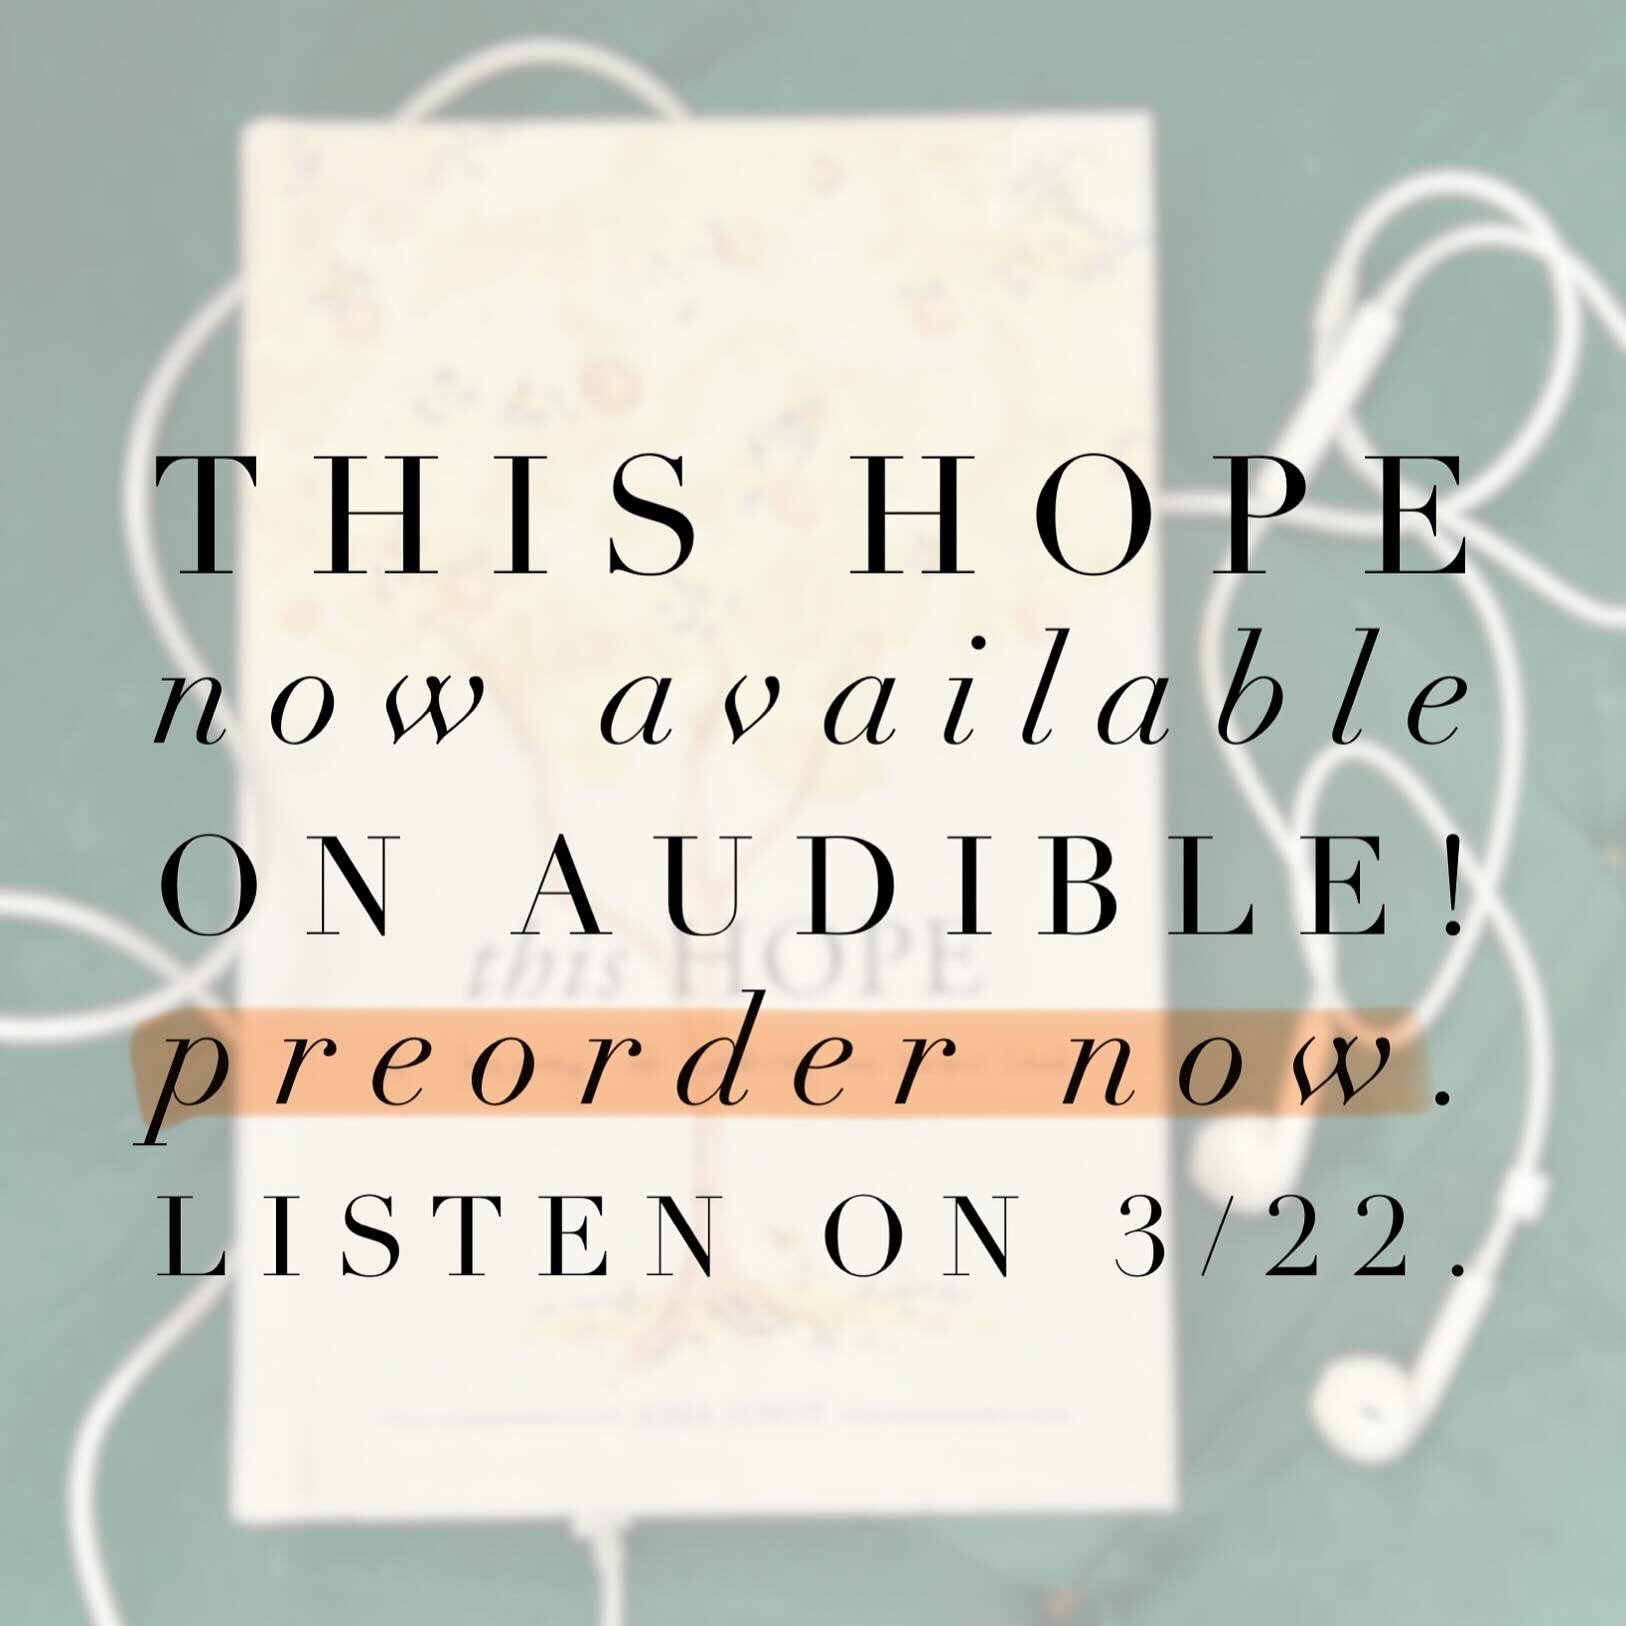 A shareable graphic, if you&rsquo;re into that sort of thing. 

Link in bio, or just search &ldquo;This Hope Asha Junot&rdquo; in your Audible or Amazon app. (Still surreal to be able to write that!)

Preorder now. Listen 3/22. 

Thank you times infi